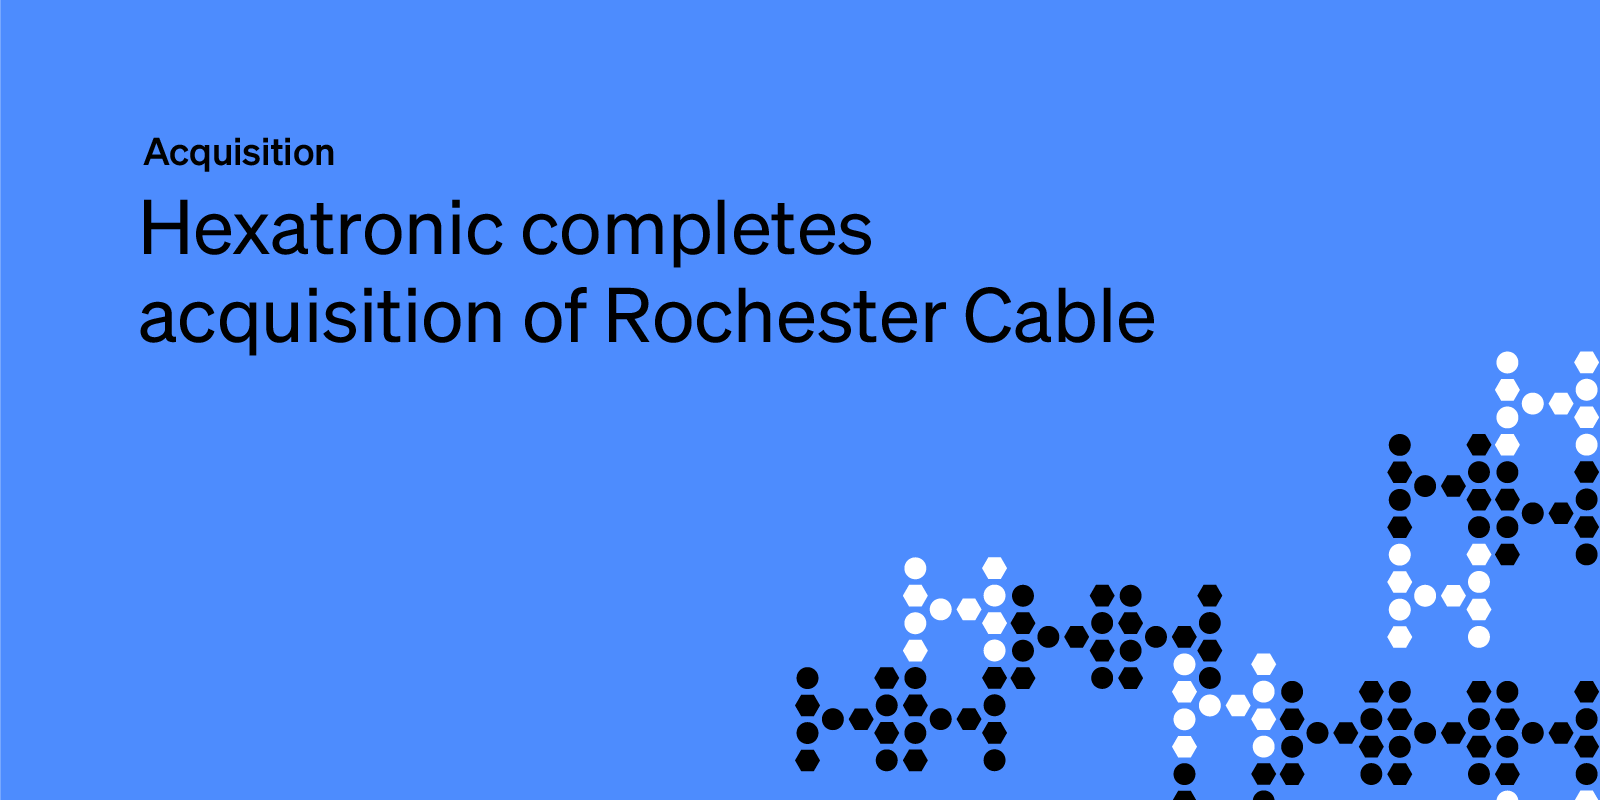 Hexatronic completes acquisition of Rochester Cable